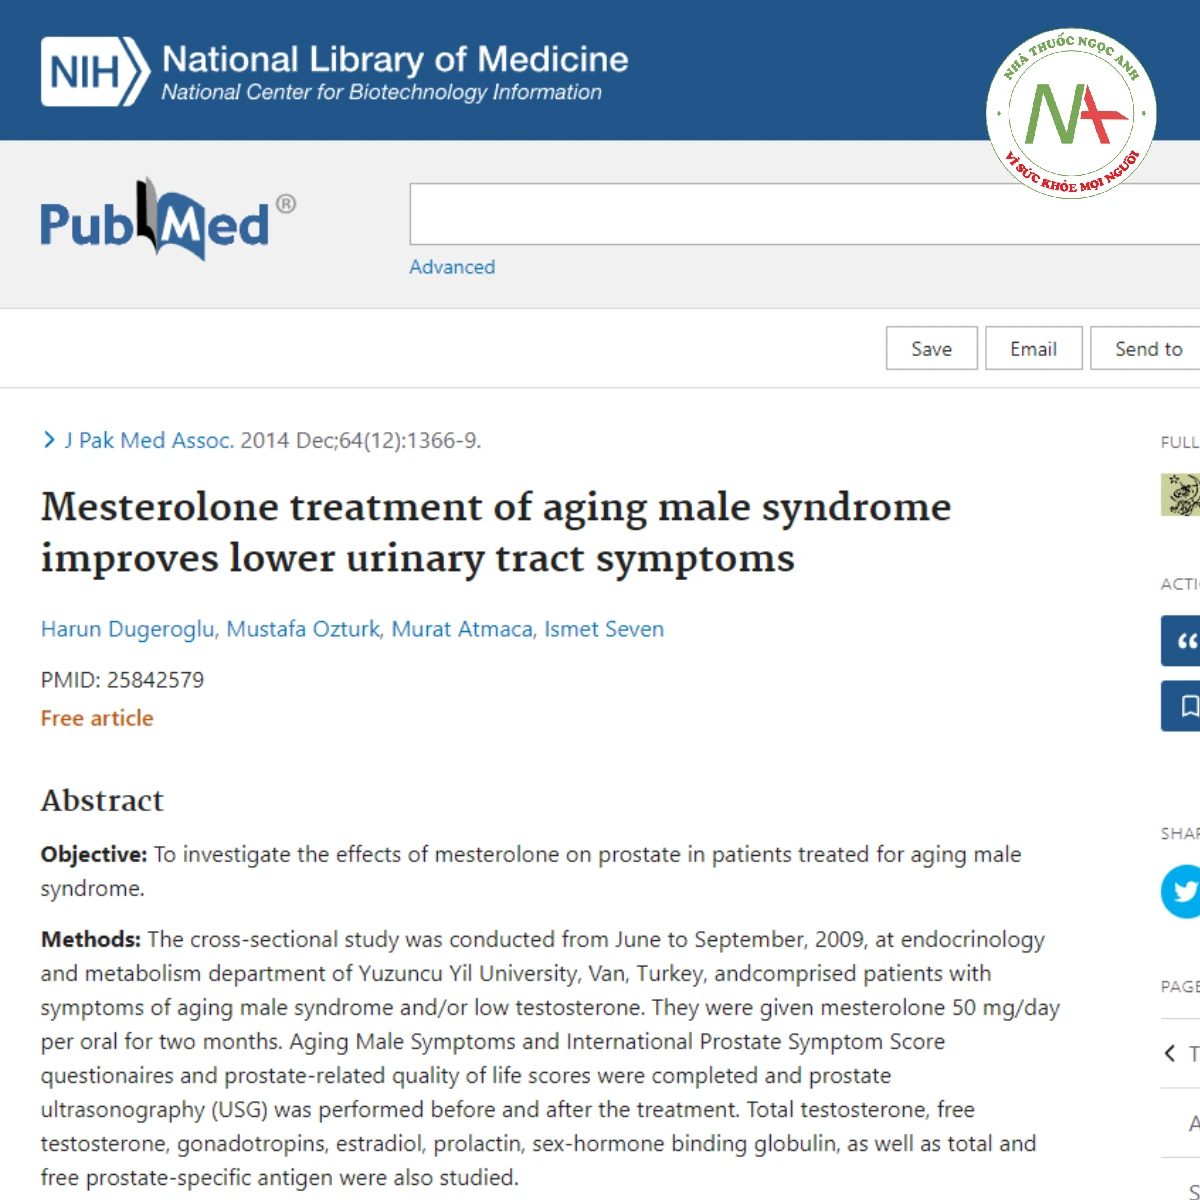 Mesterolone treatment of aging male syndrome improves lower urinary tract symptoms